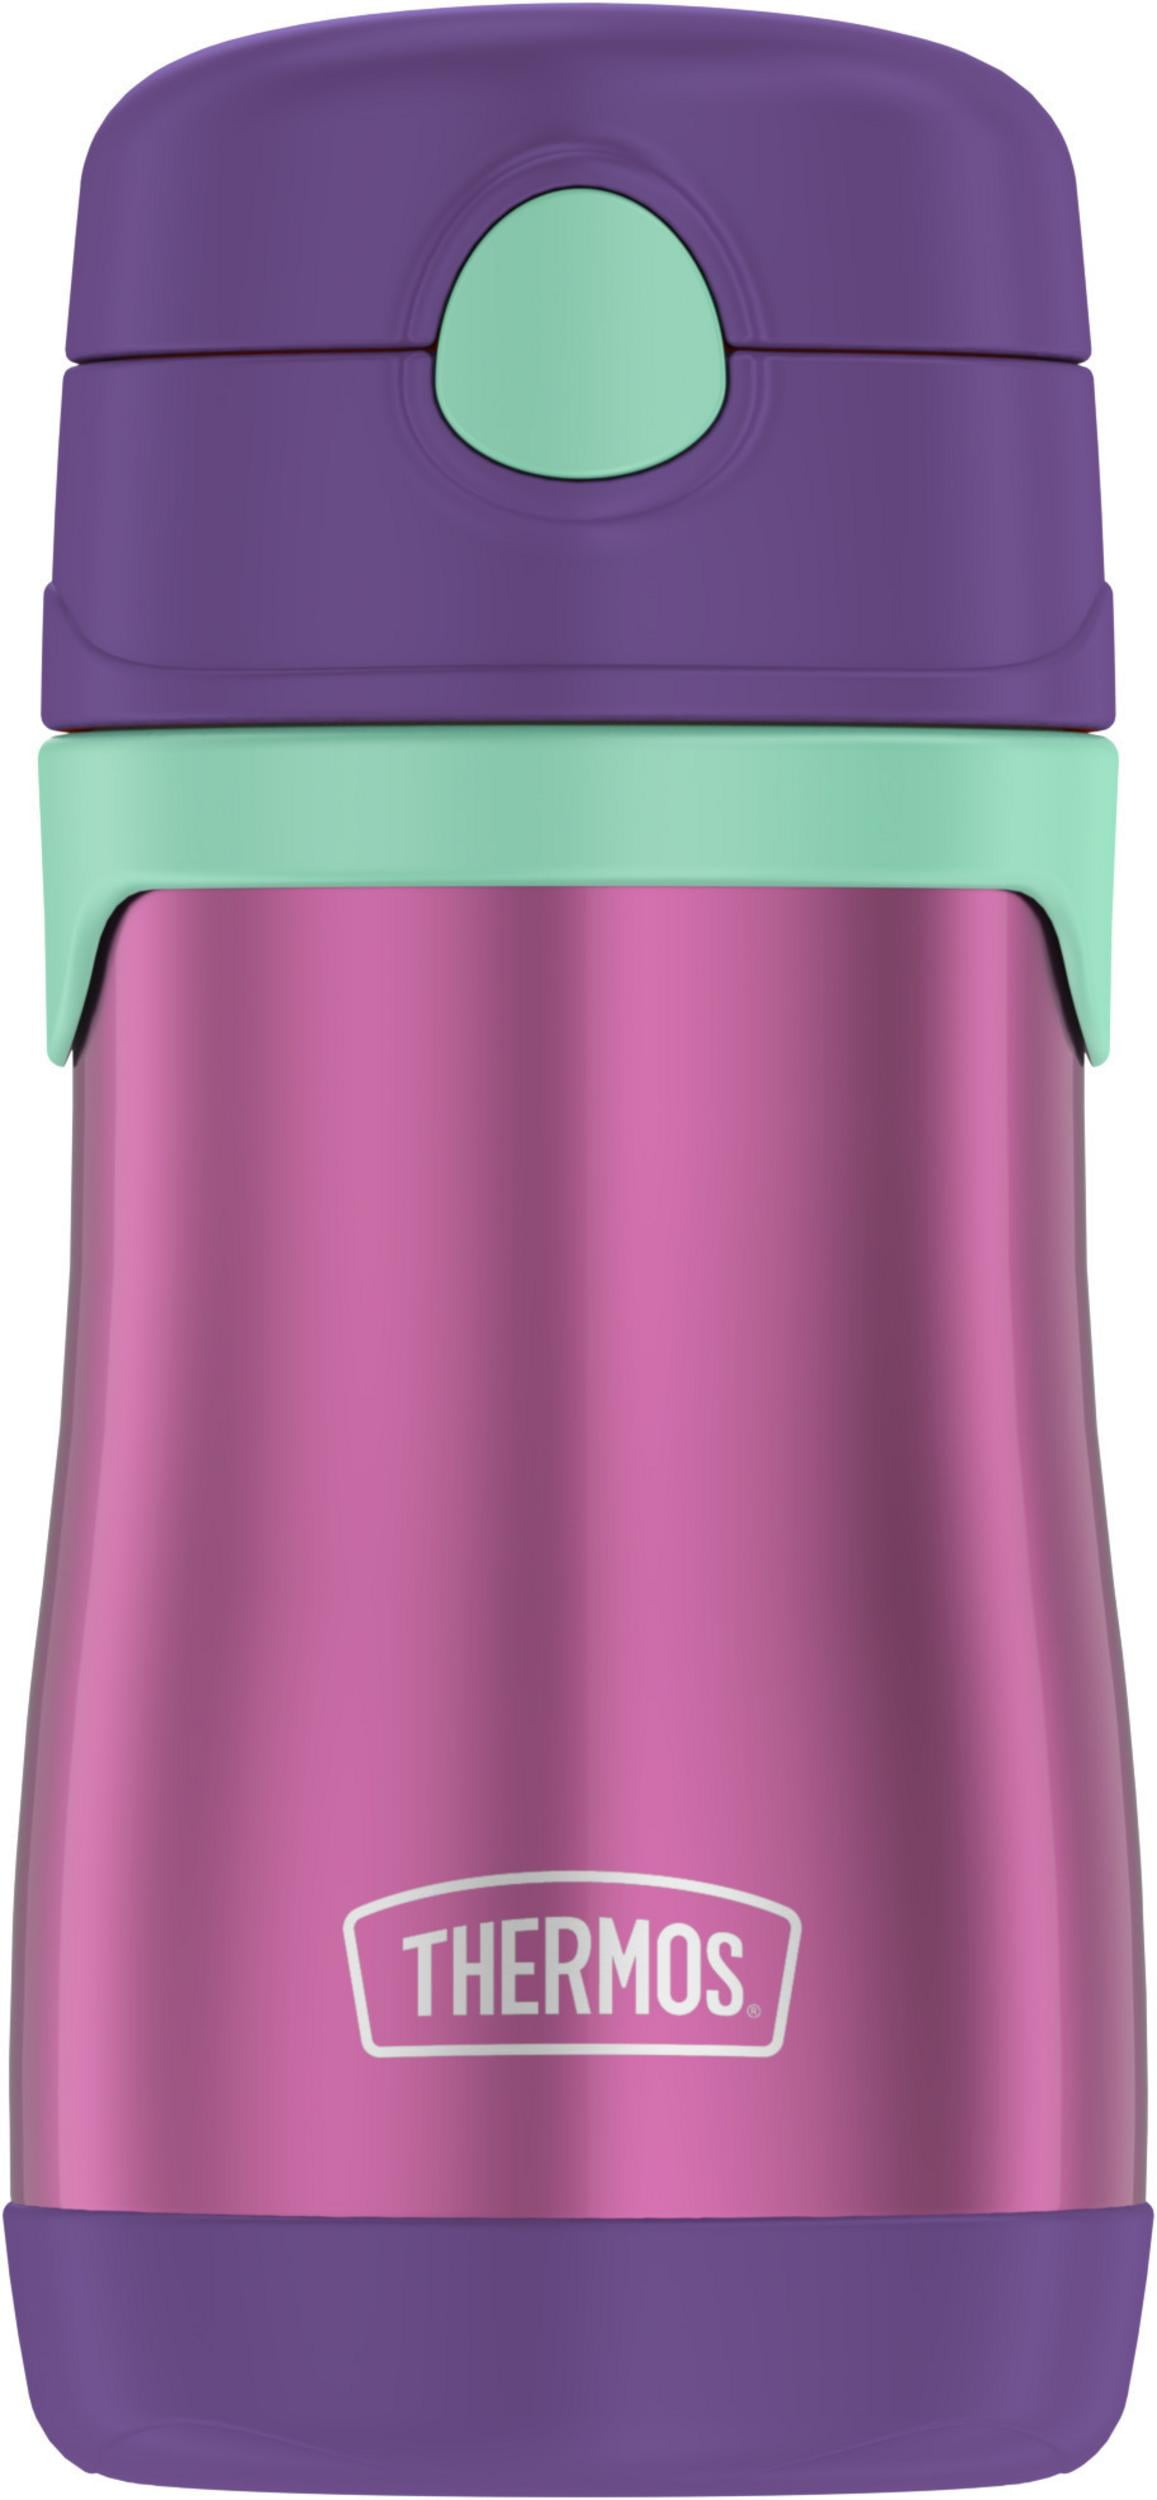 POTATO Baby Thermos Cup Water Bottle for Kids Stainless Steel Sippy Cup  with 3 Kinds of Lids,Keeps Cold for 8 Hours 8 oz, Pink